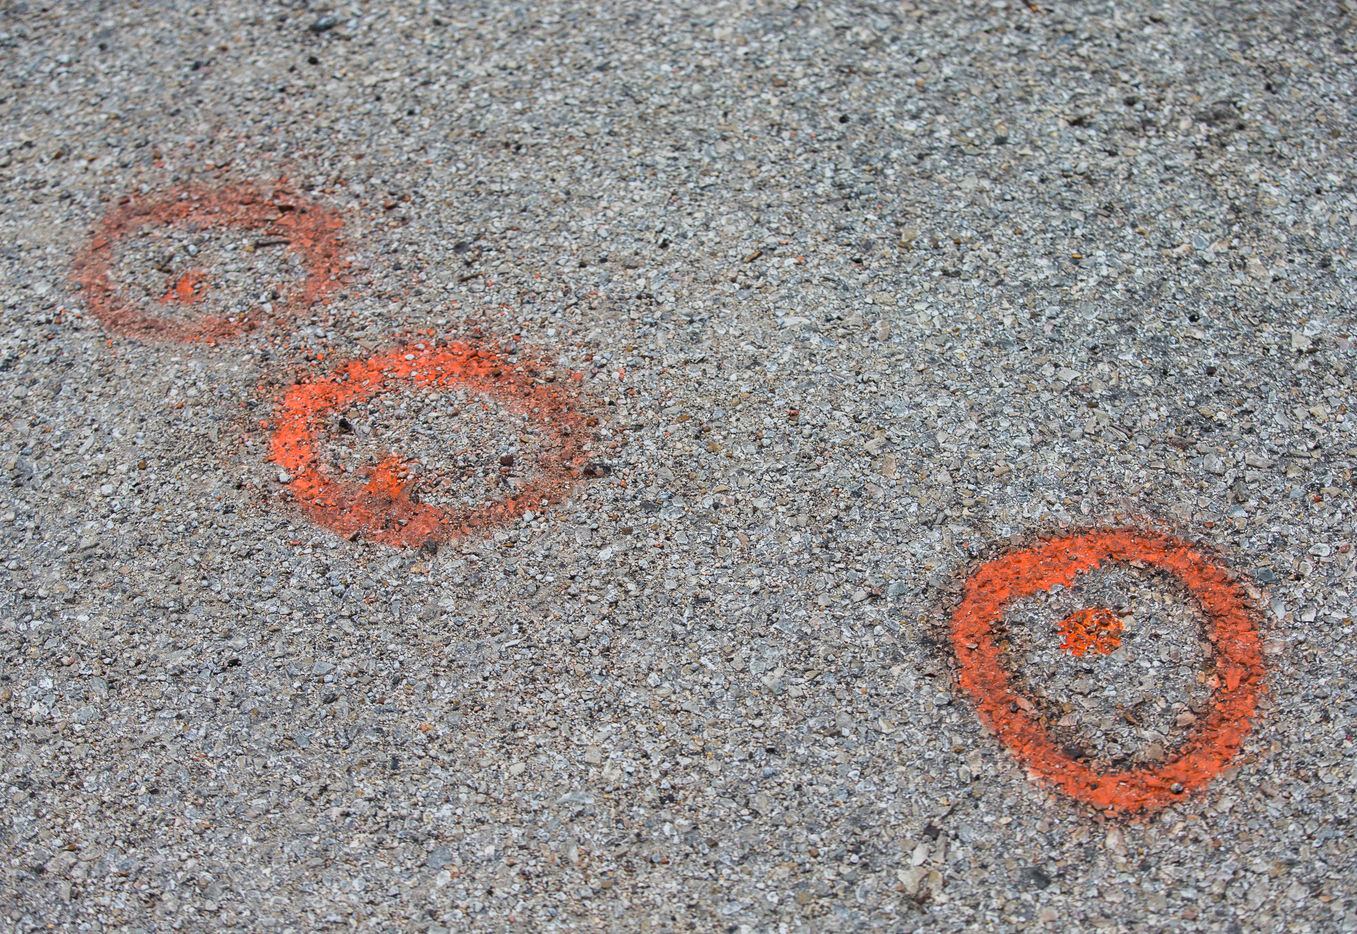 Orange spray painted circles mark the location where four shell casings were found.